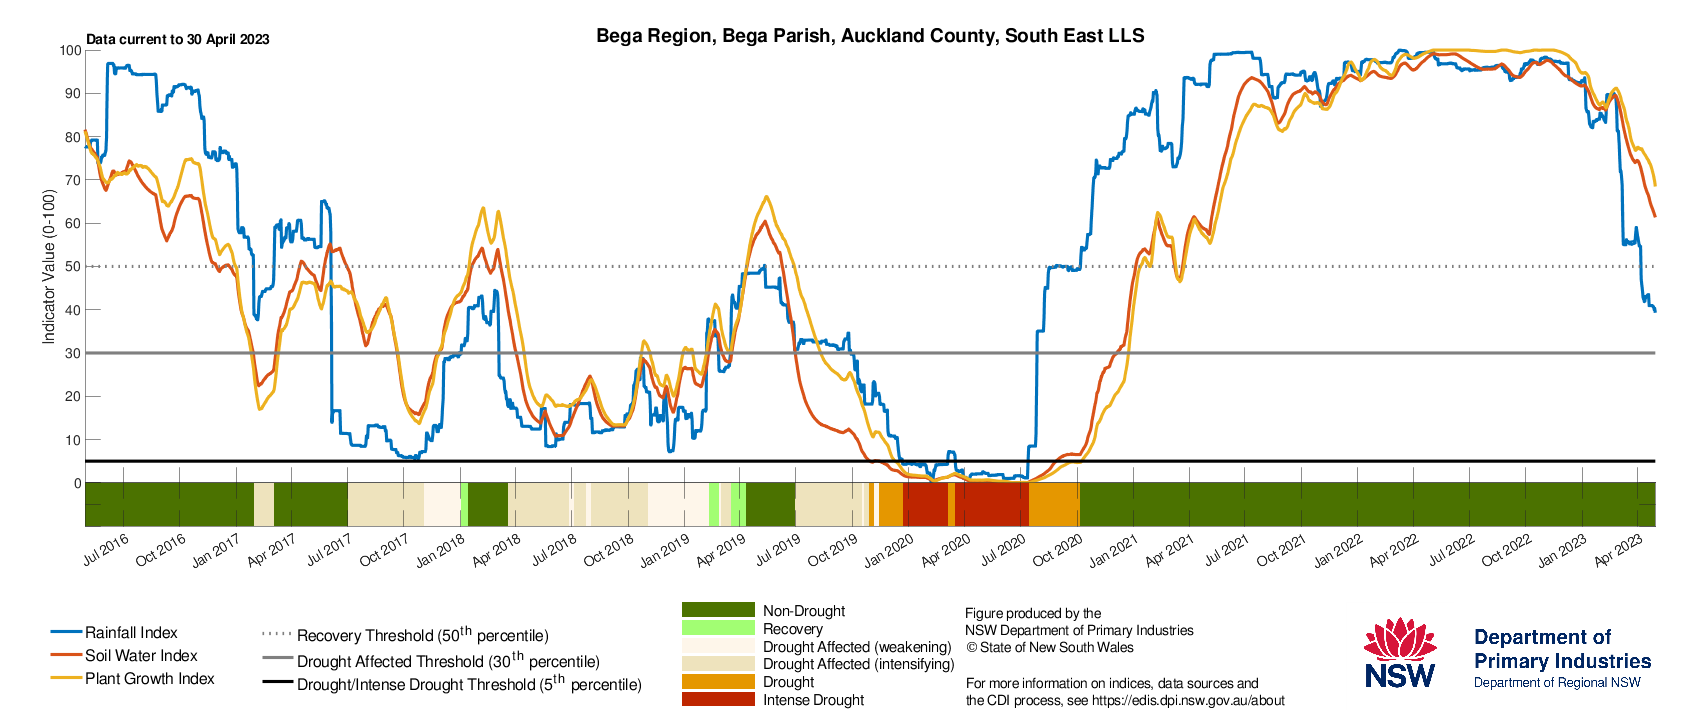 Figure 32. Drought History charts for Bega, Cooma and Goulburn in the South East LLS show the current and historical status of the three drought indicators: Rainfall Index, Soil Water Index, and Plant Growth Index